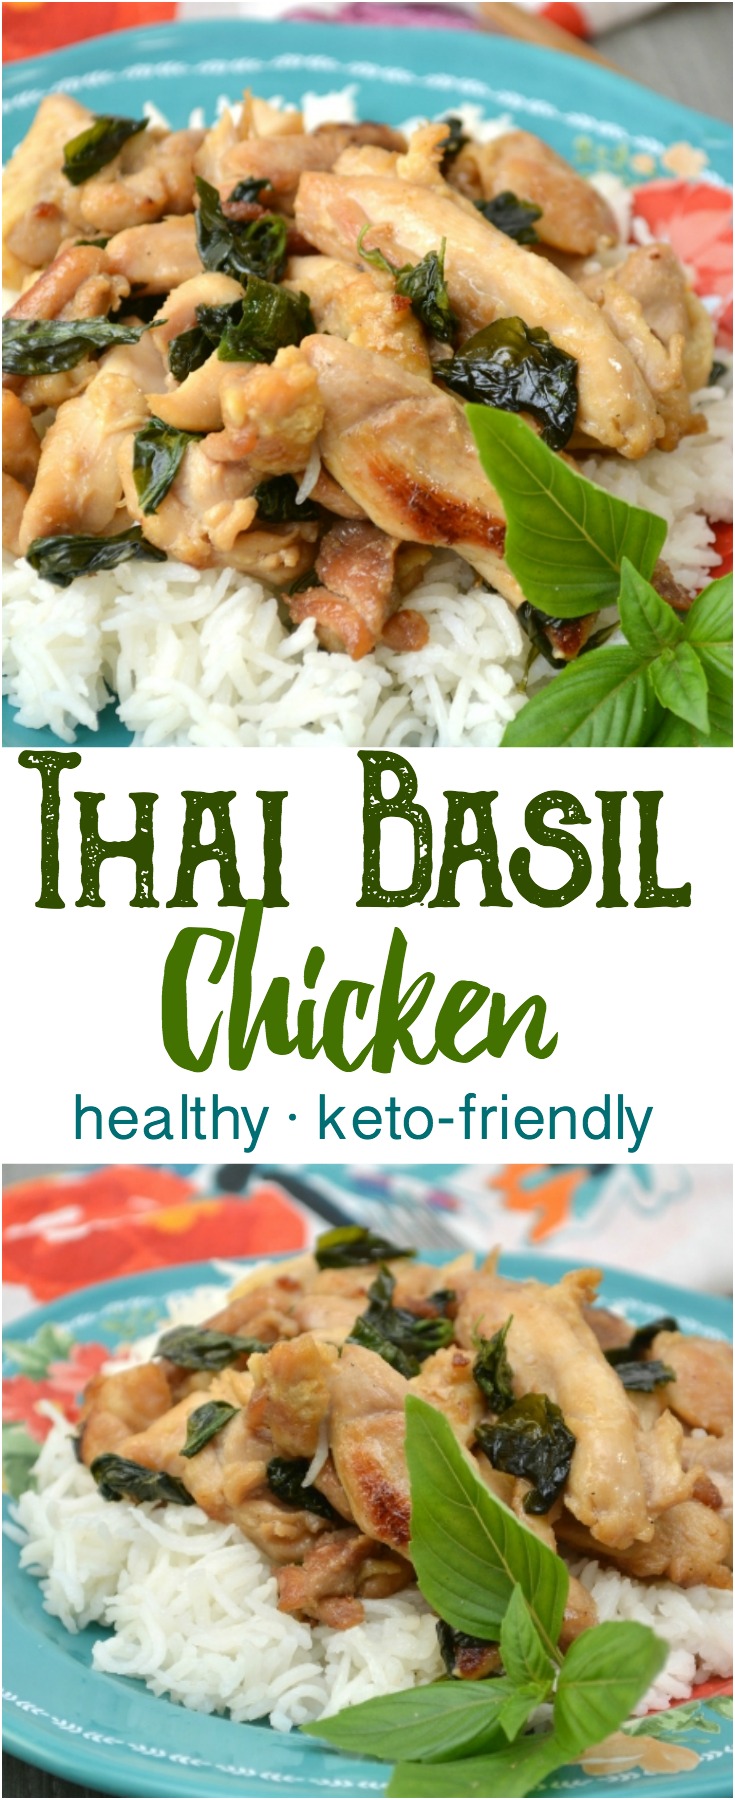 Thai Basil Chicken. Make this healthier take-out version at home in under 20 minutes. It's delicious, and comes together quickly!